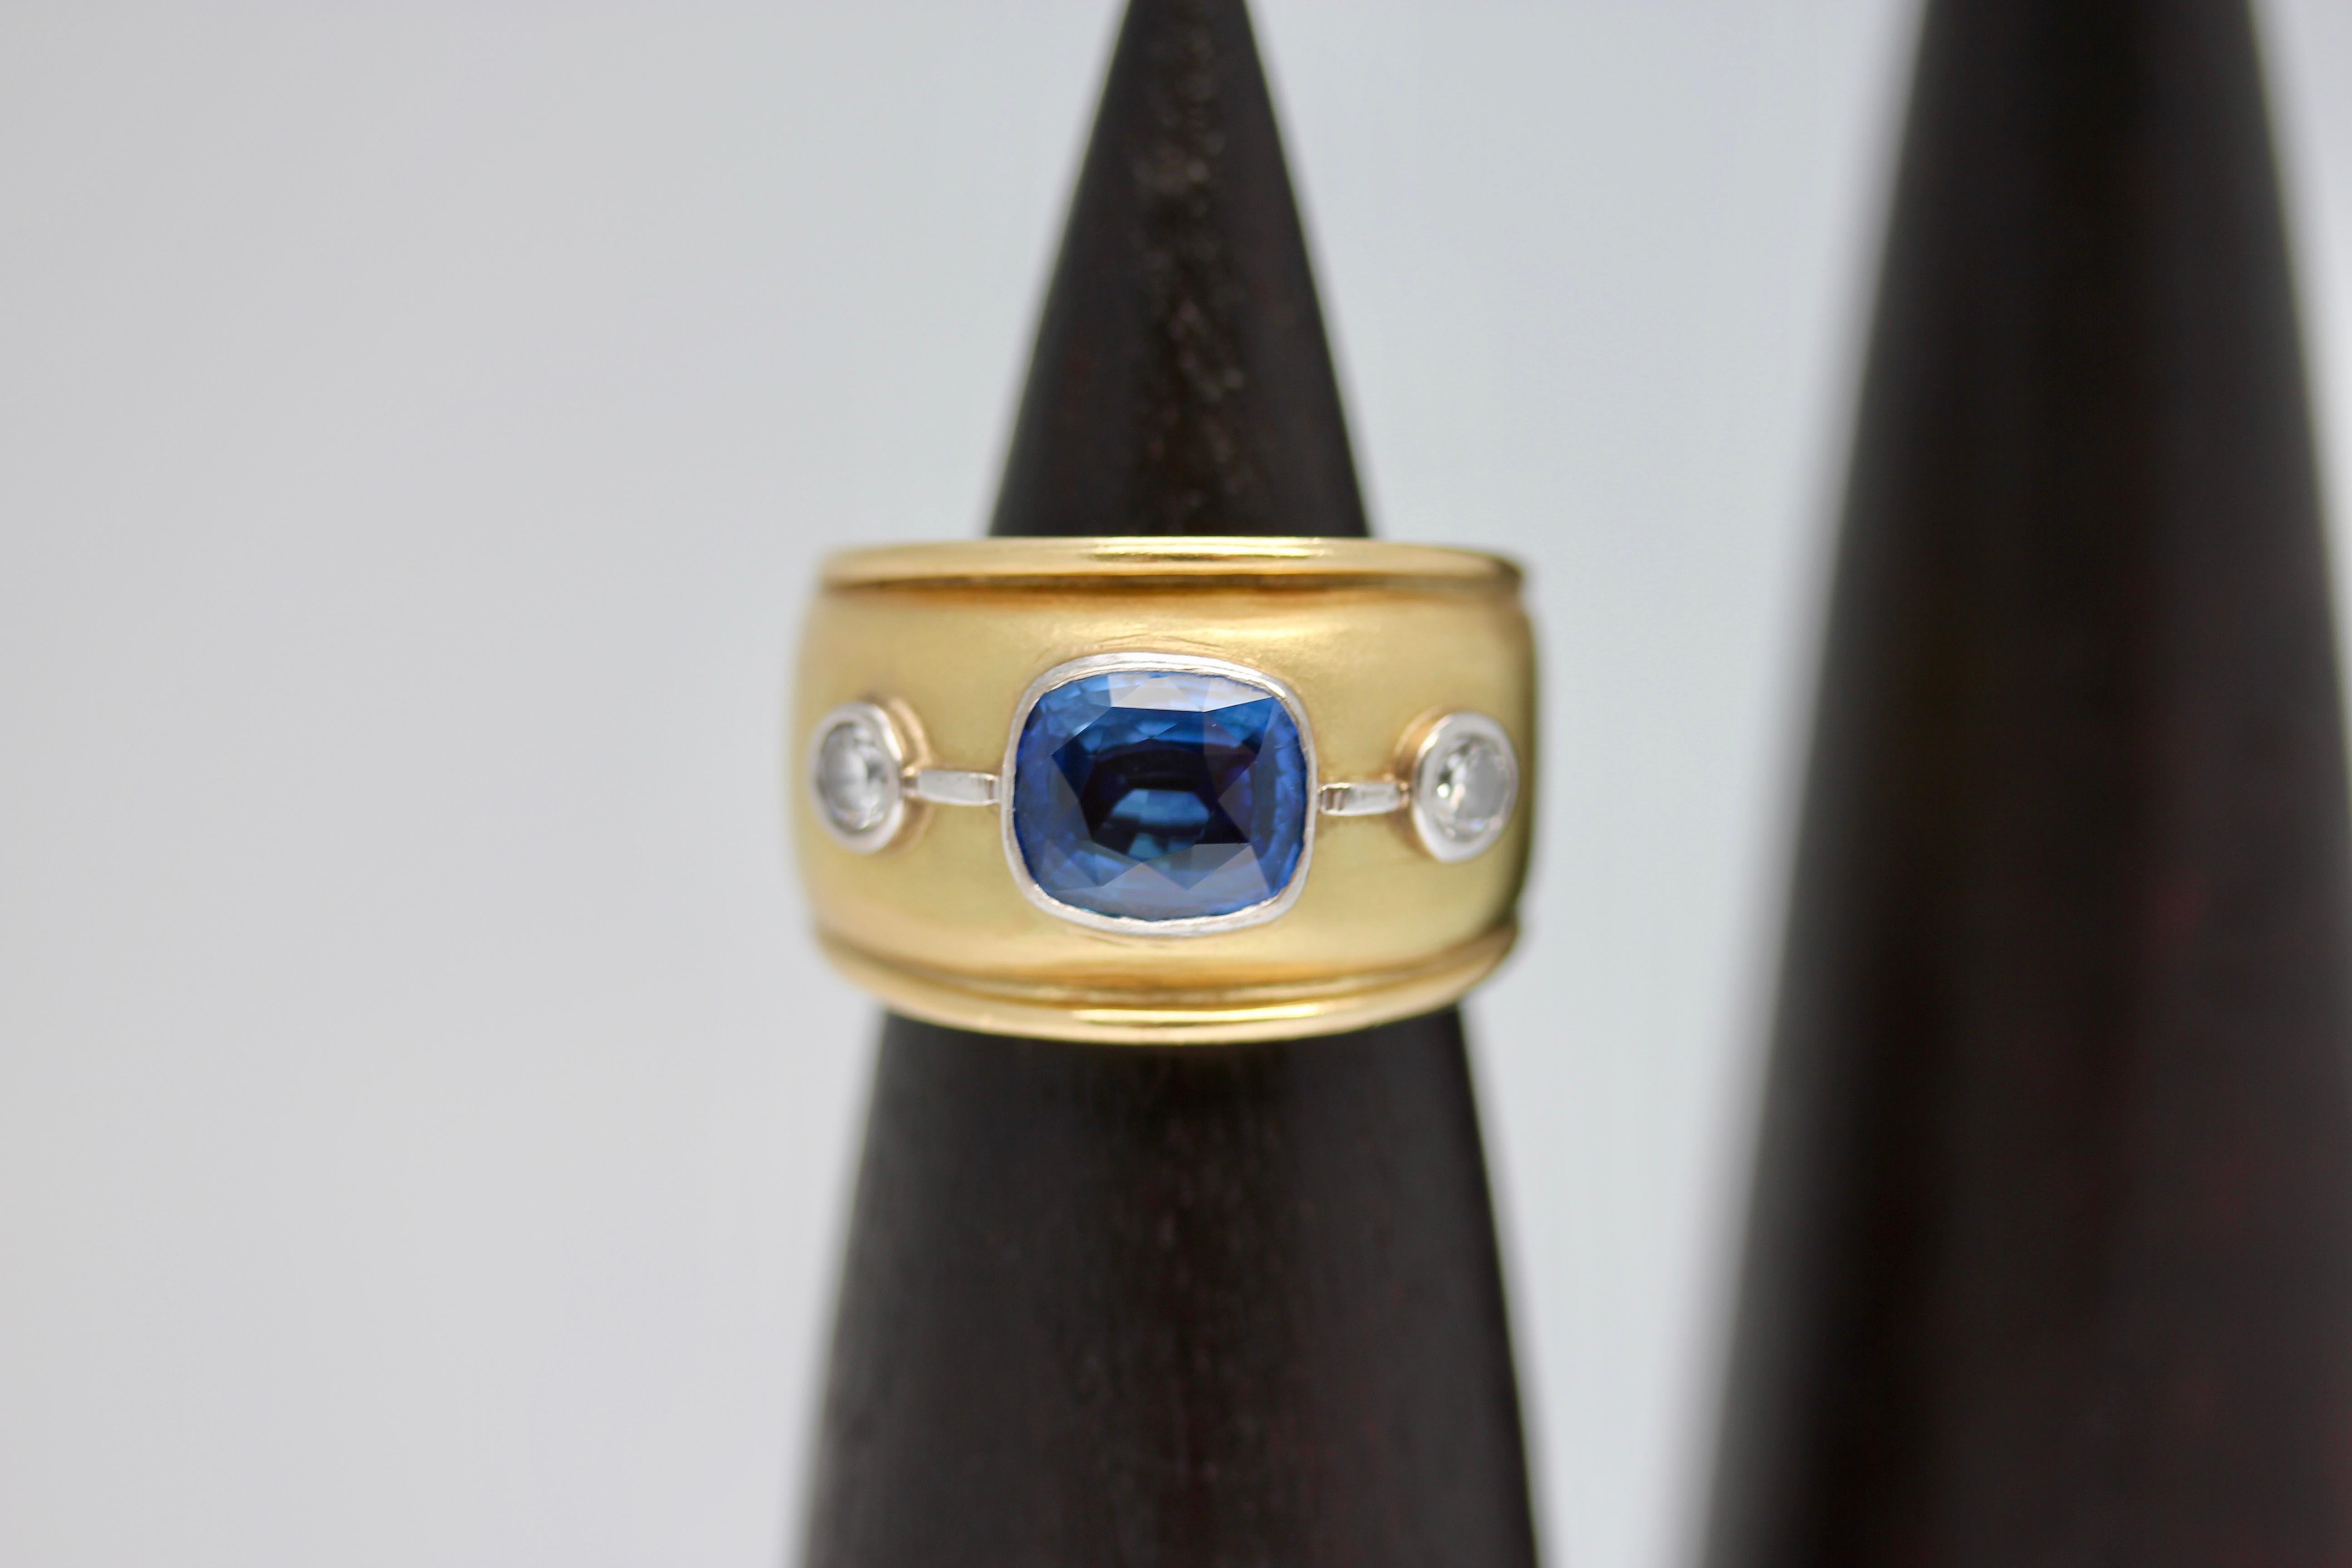 Stunning Sri Lankan blue sapphire and white diamond 18 karat yellow gold cocktail ring. A beautiful and modern design featuring a blue sapphire and two round diamonds set into a comfortable and elegant design. 

This item is made bespoke, lead time